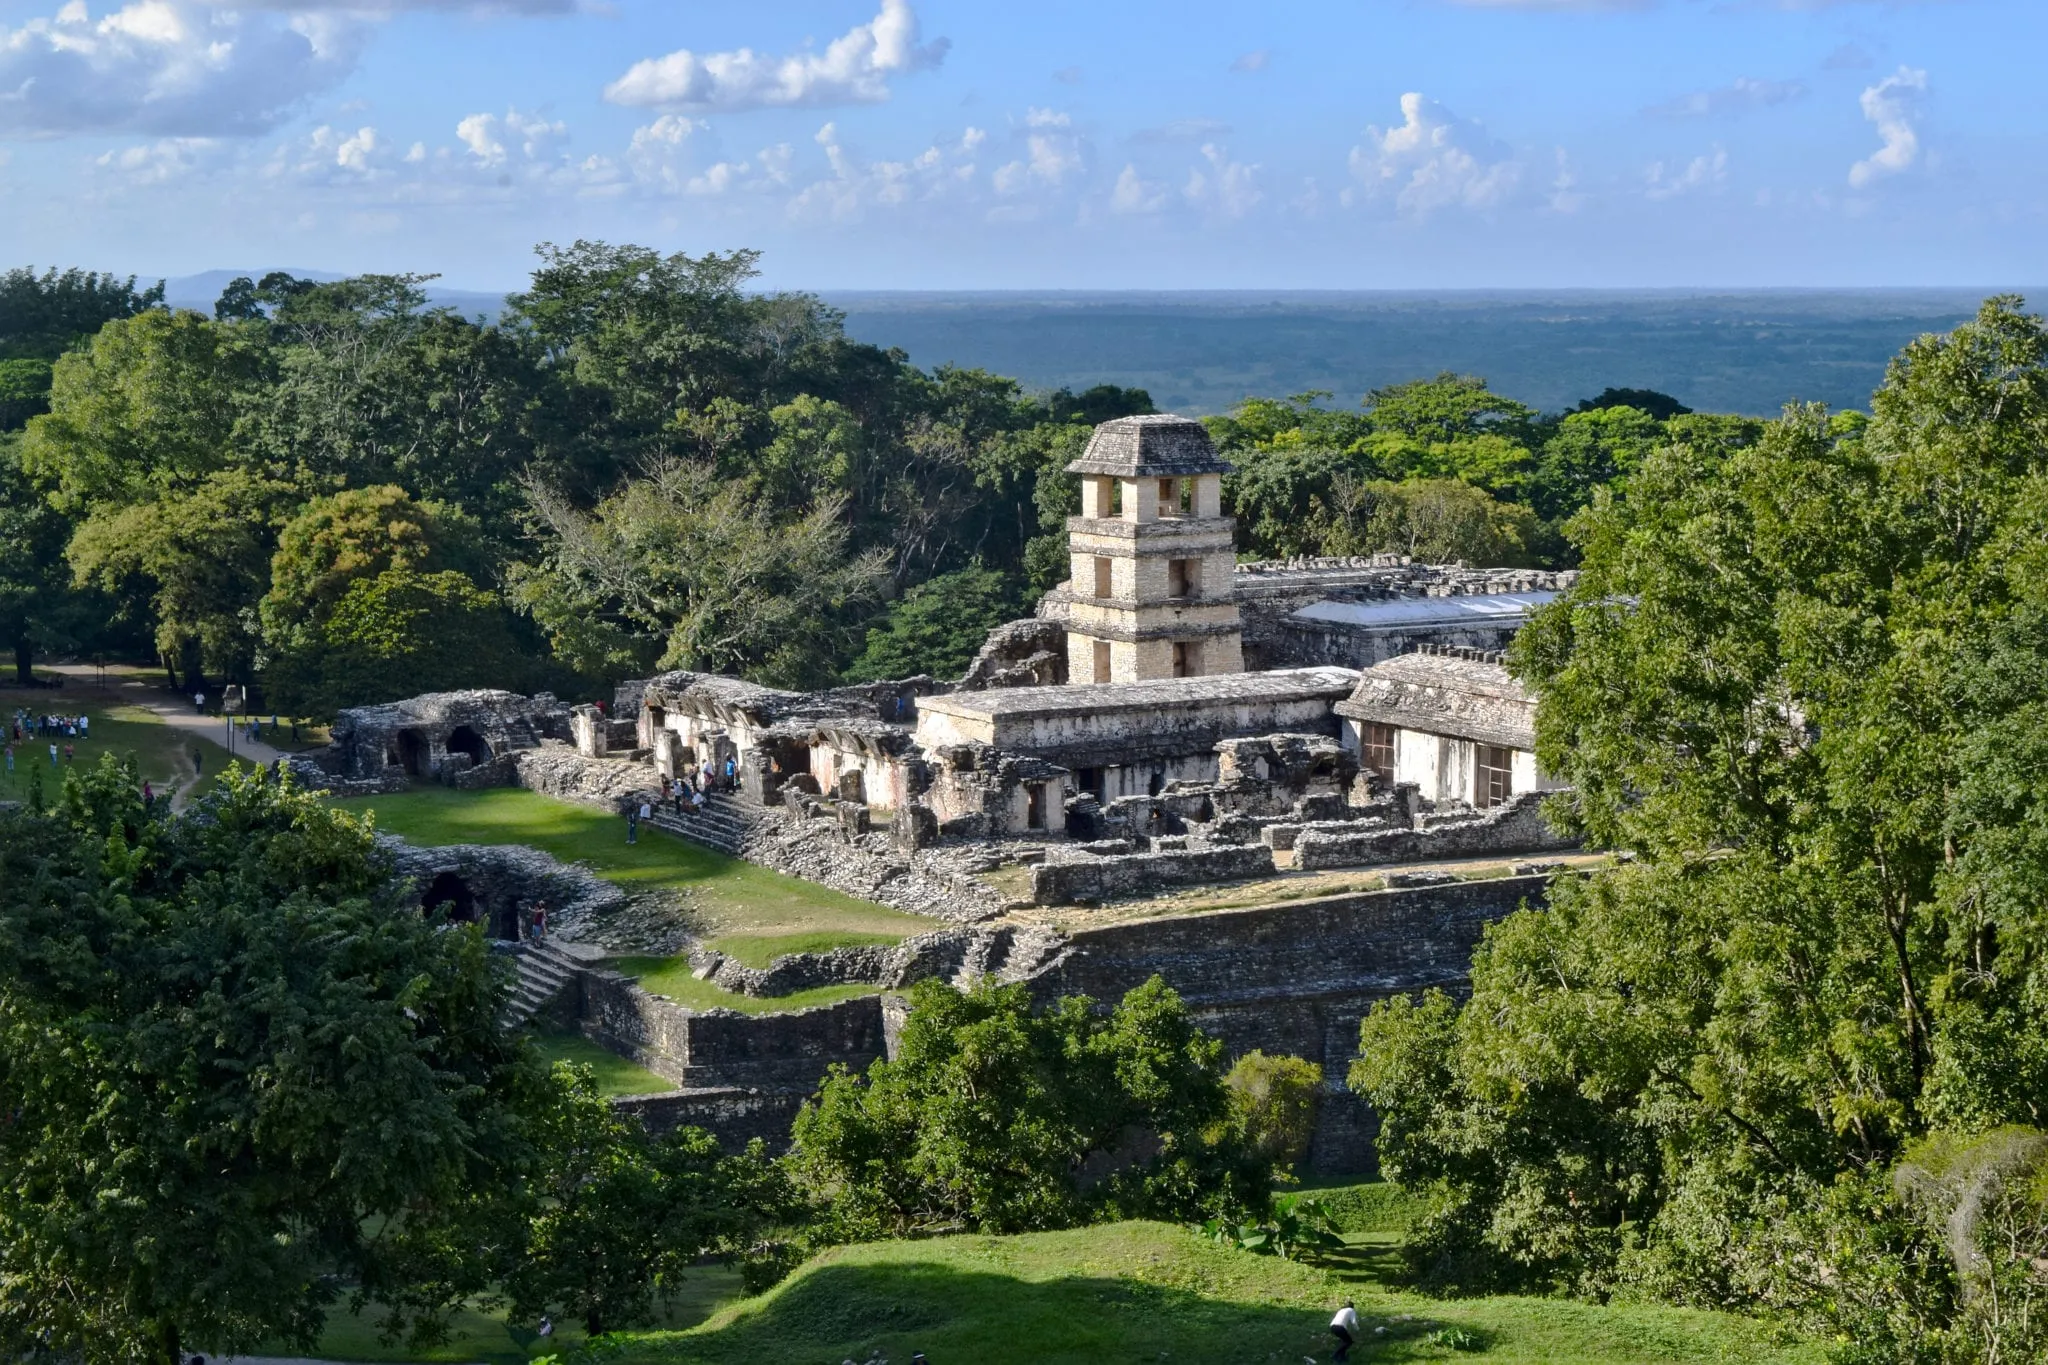 ruins of palenque as seen from above, an amazing stop on a 2 weeks in mexico itinerary